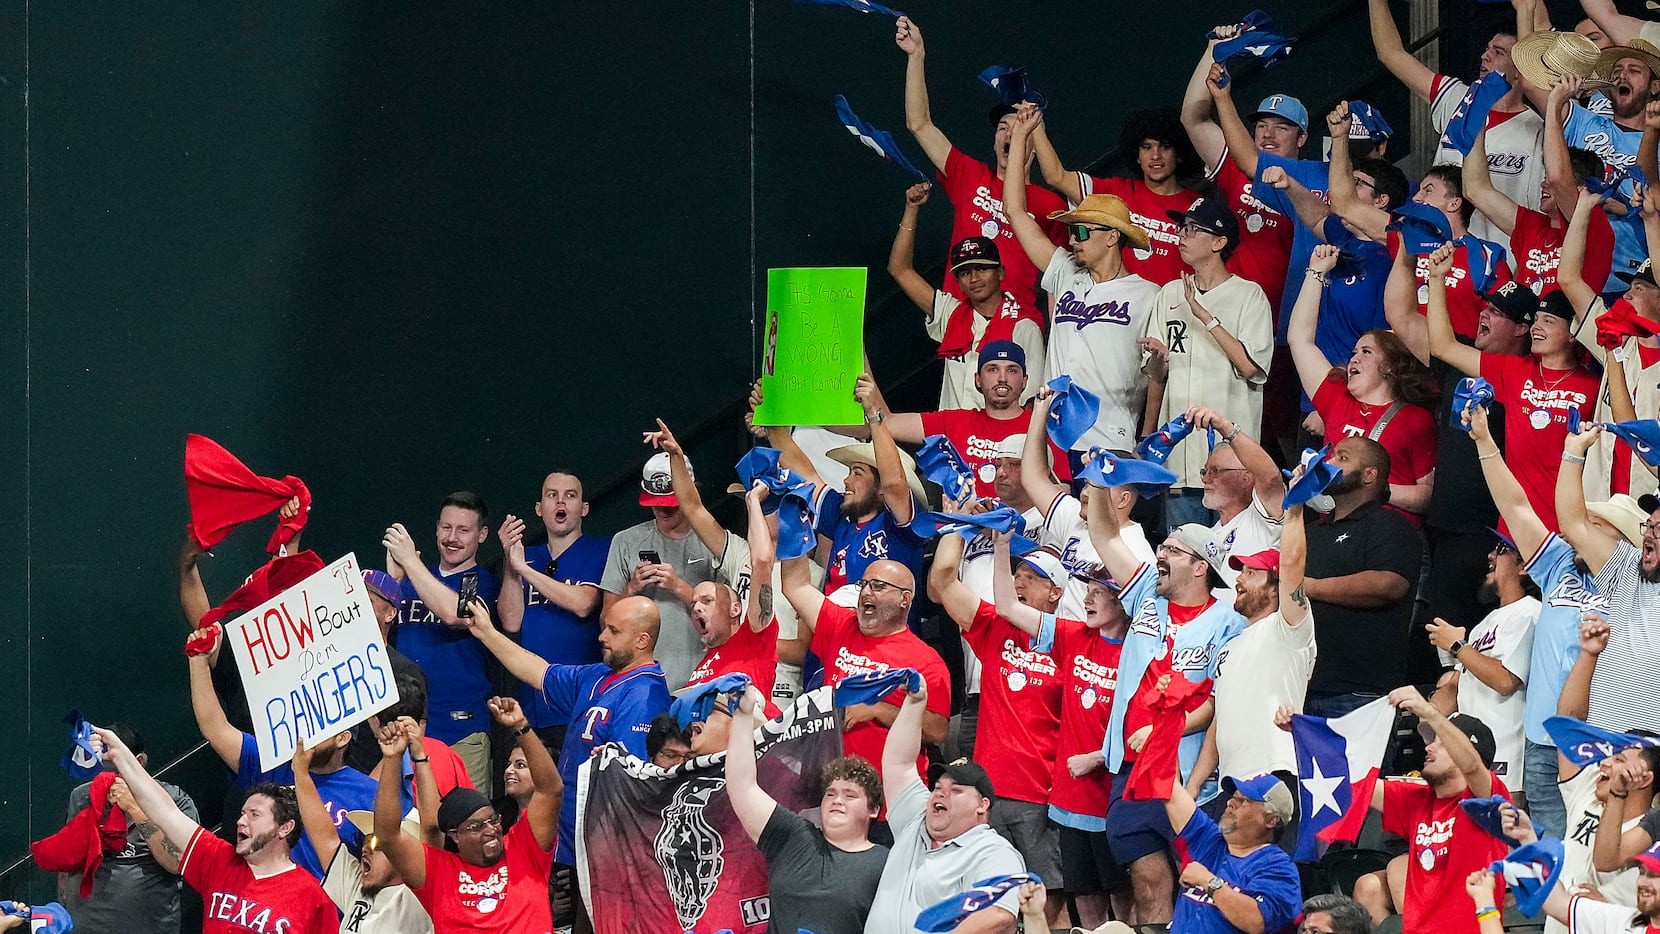 How To Find The Cheapest Texas Rangers ALCS Tickets